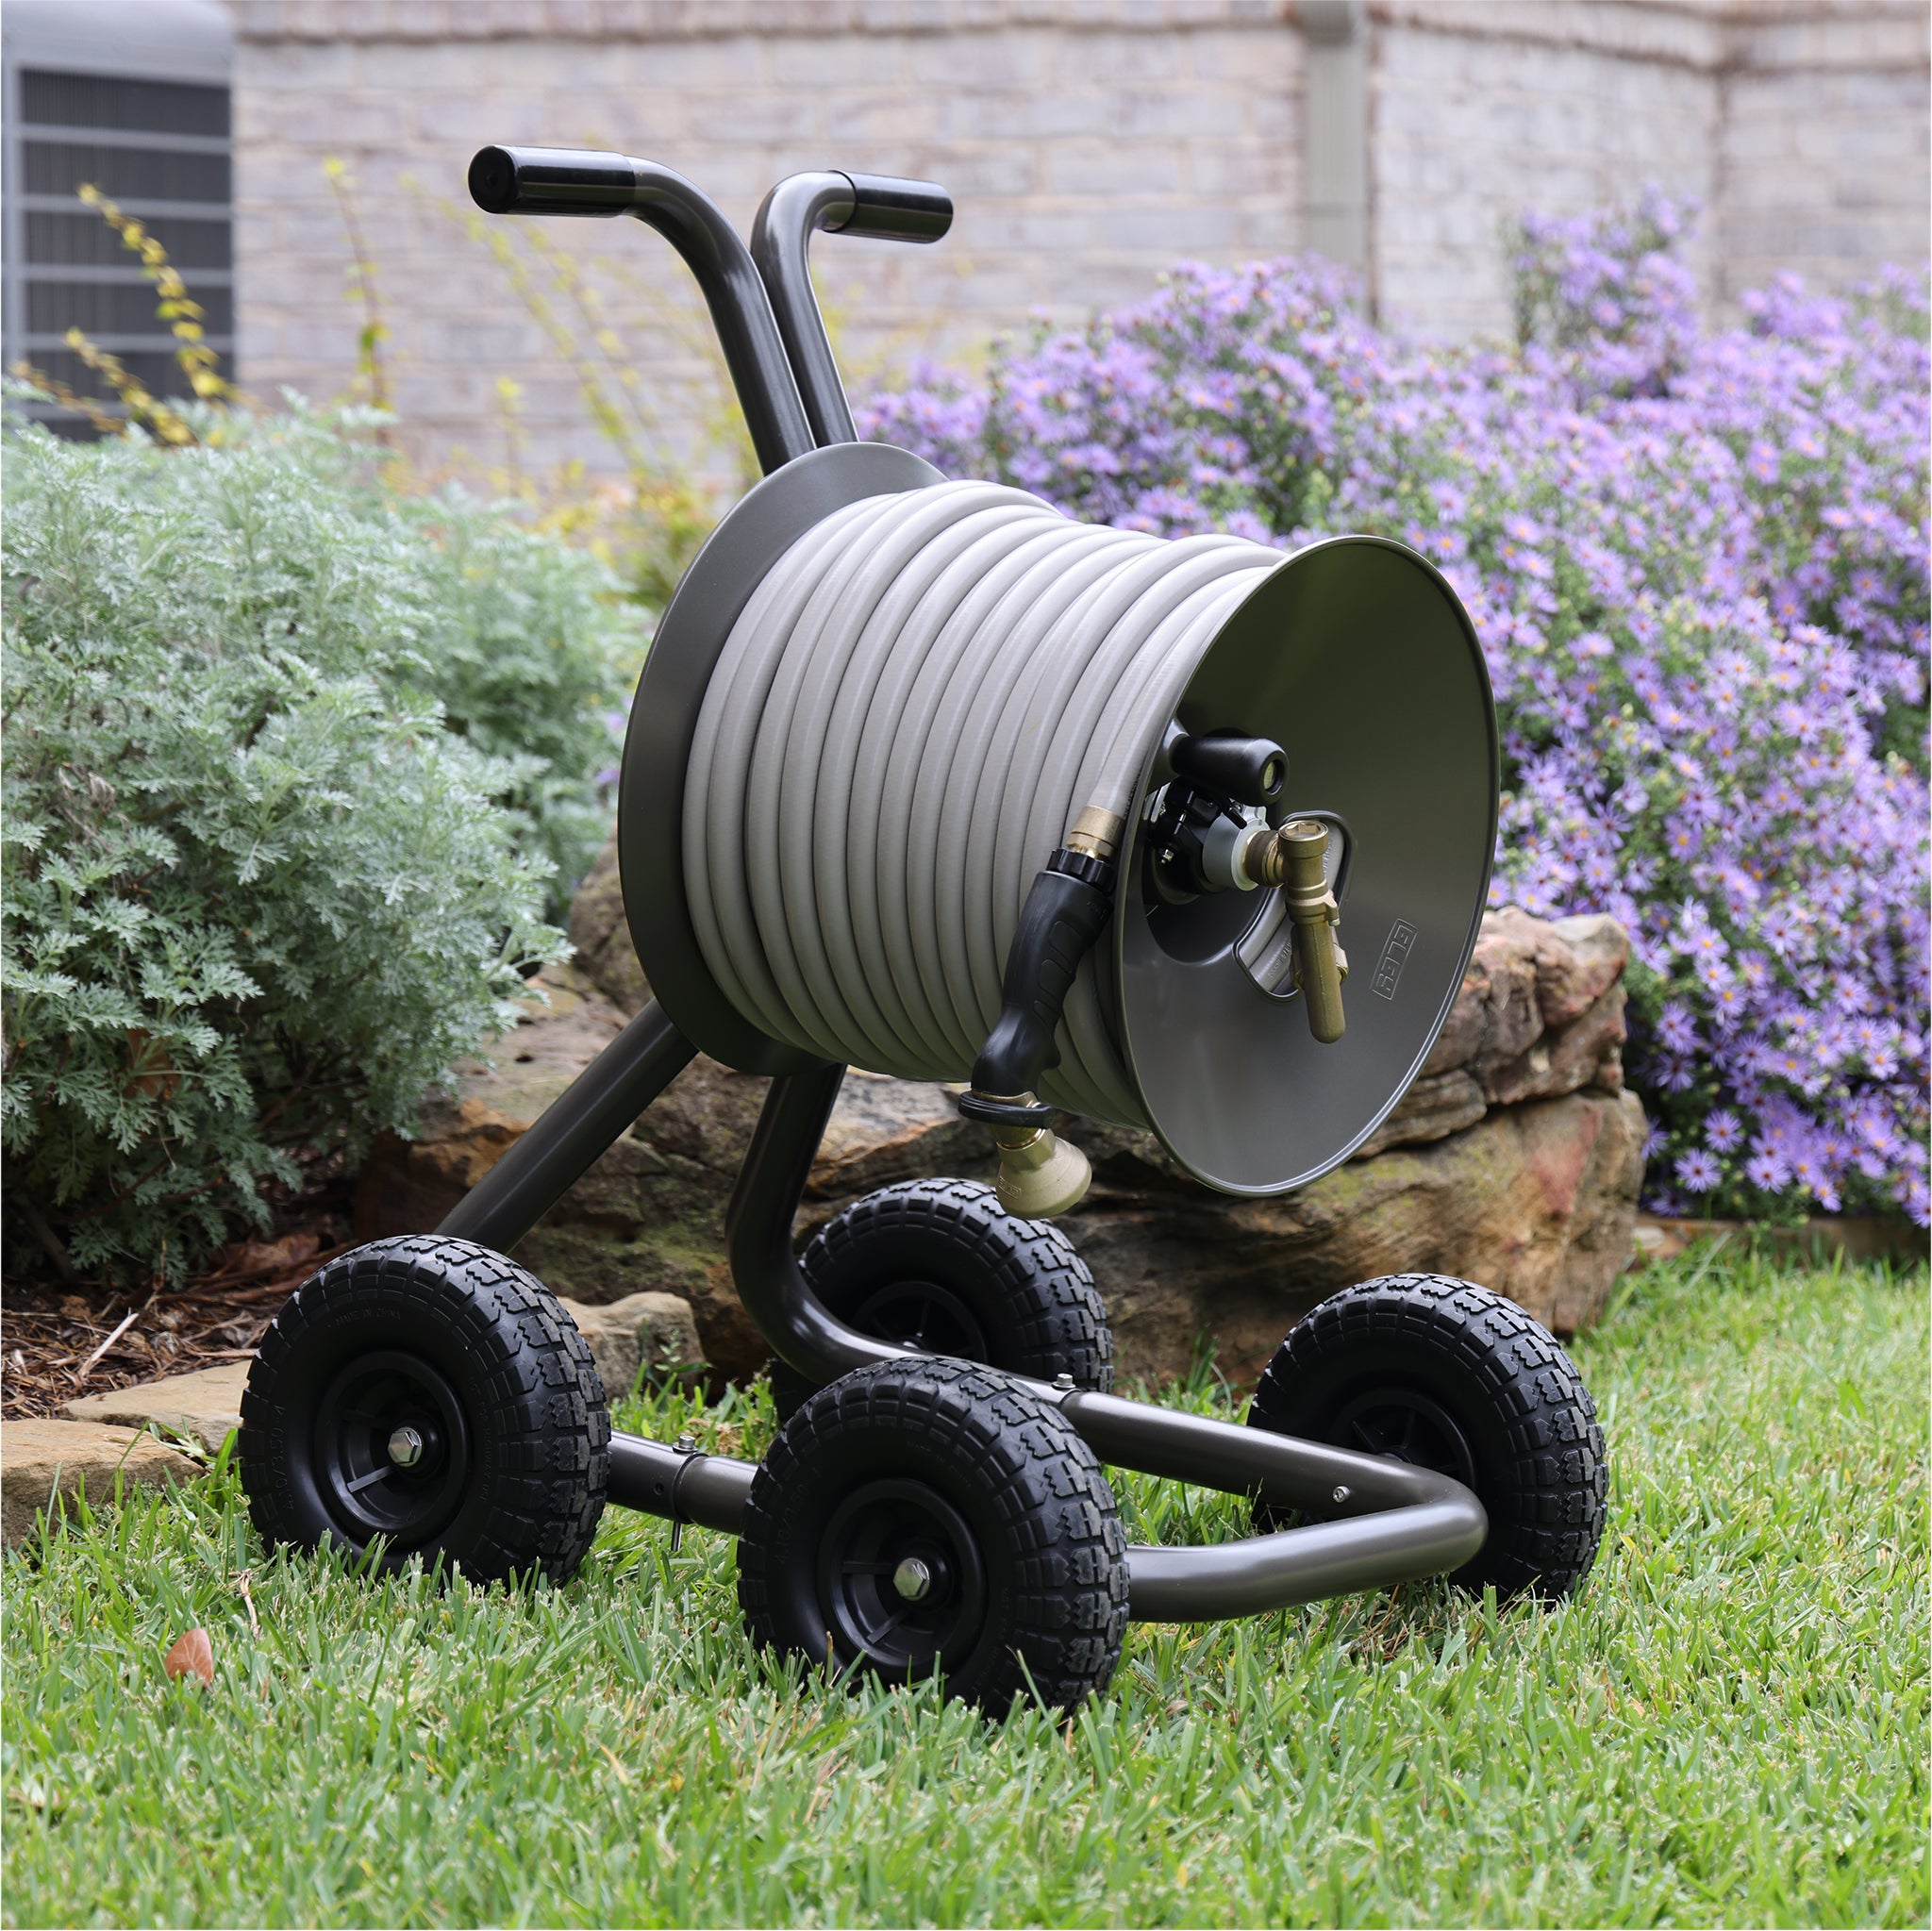  ELEY Hose Reel Cart with Wheels & Quad Wheel Kit – Portable  Heavy Duty Hose Reel and Garden Hose Holder w/Additional 2 Wheel Kit for  Conversion to 4-Wheel Hose Reel Cart 